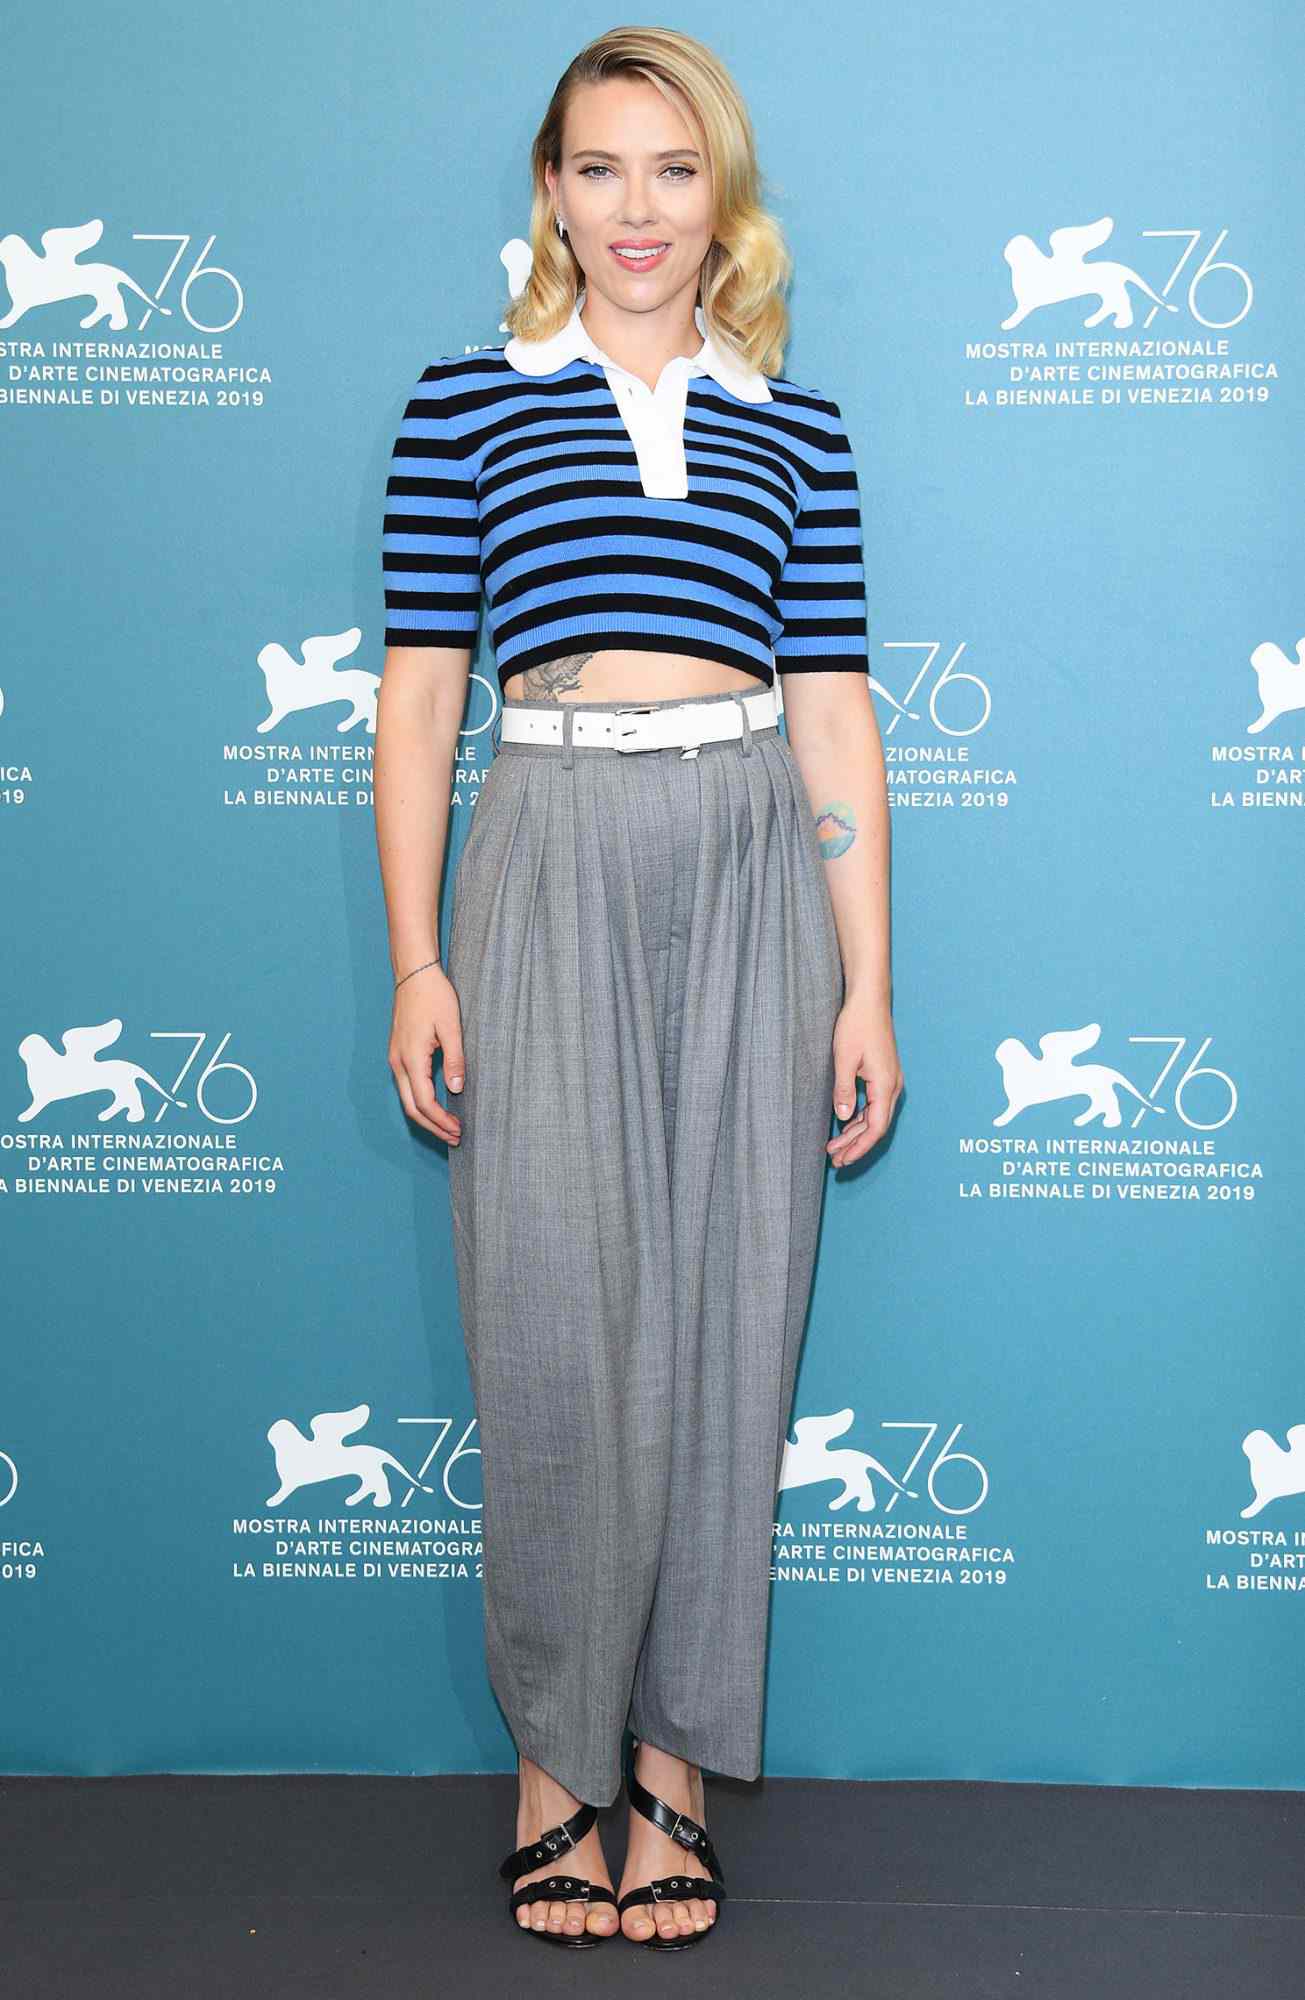 "Marriage Story" Photocall - The 76th Venice Film Festival